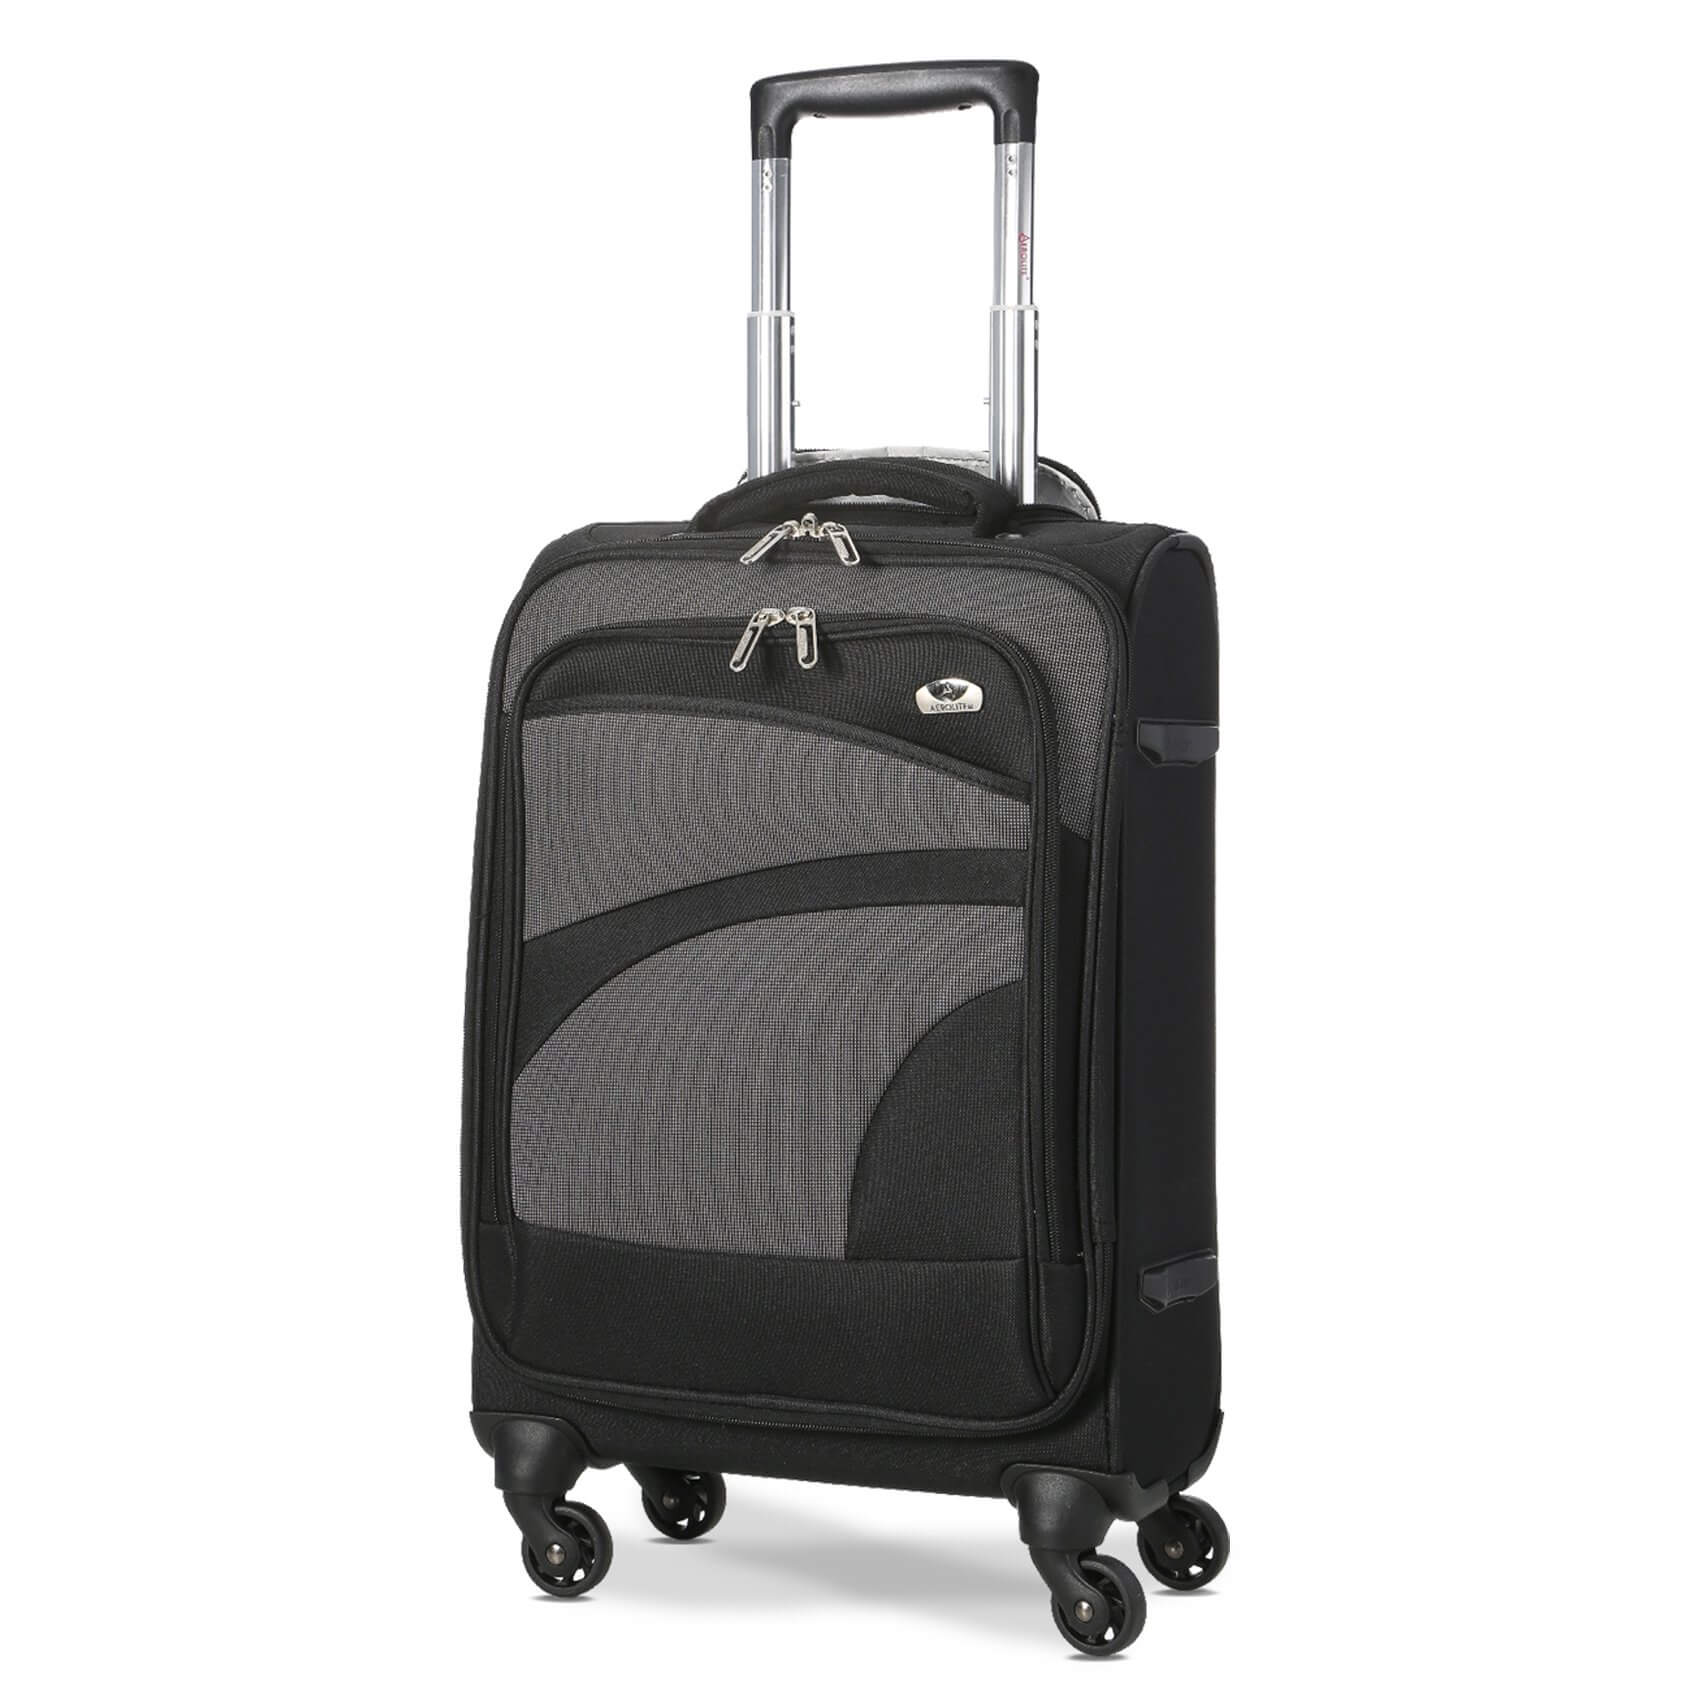 Source unique spinner wheels top case best suitcase soft carry and soft  cabin luggage with wheels on m.alibaba.com